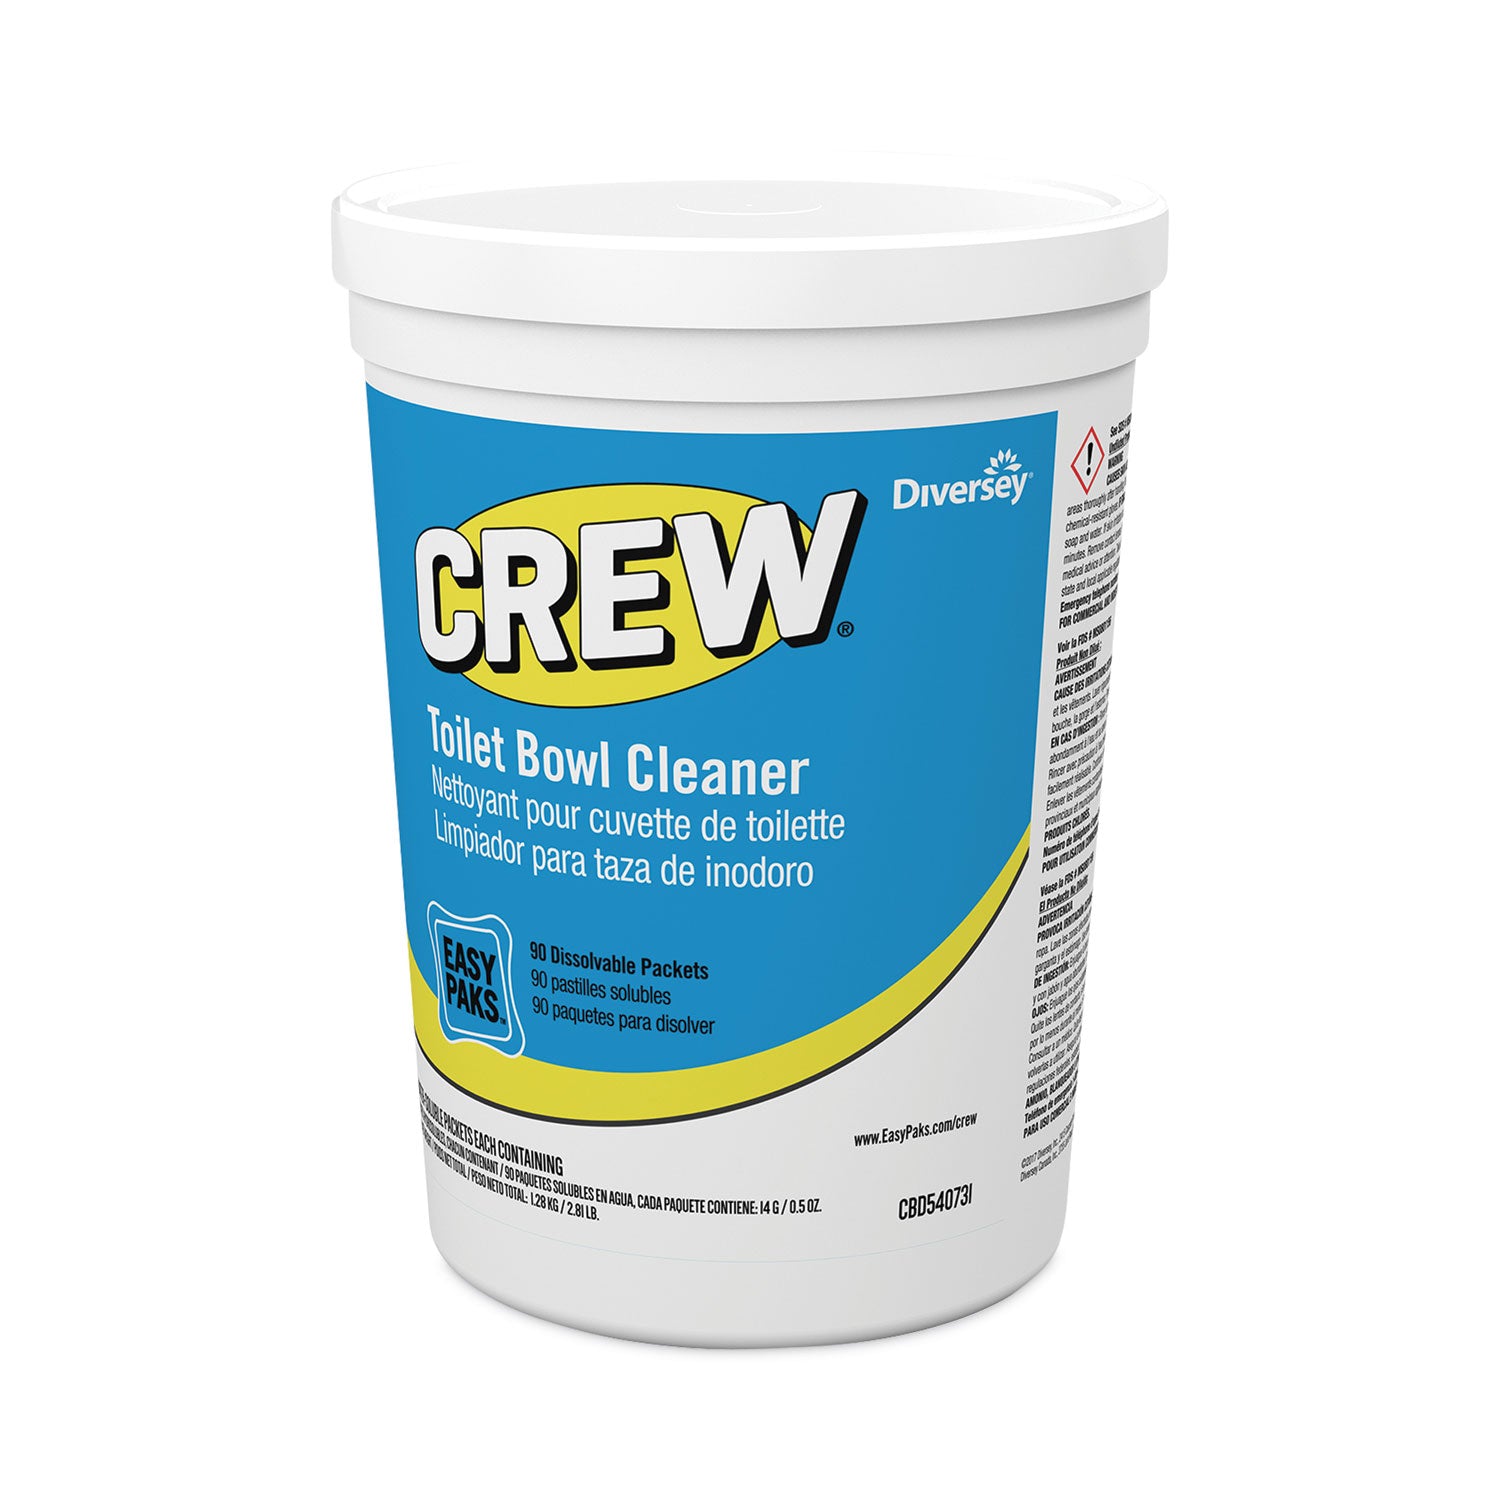 crew-easy-paks-toilet-bowl-cleaner-fresh-floral-scent-05-oz-packet-90-packets-tub-2-tubs-carton_dvocbd540731 - 2